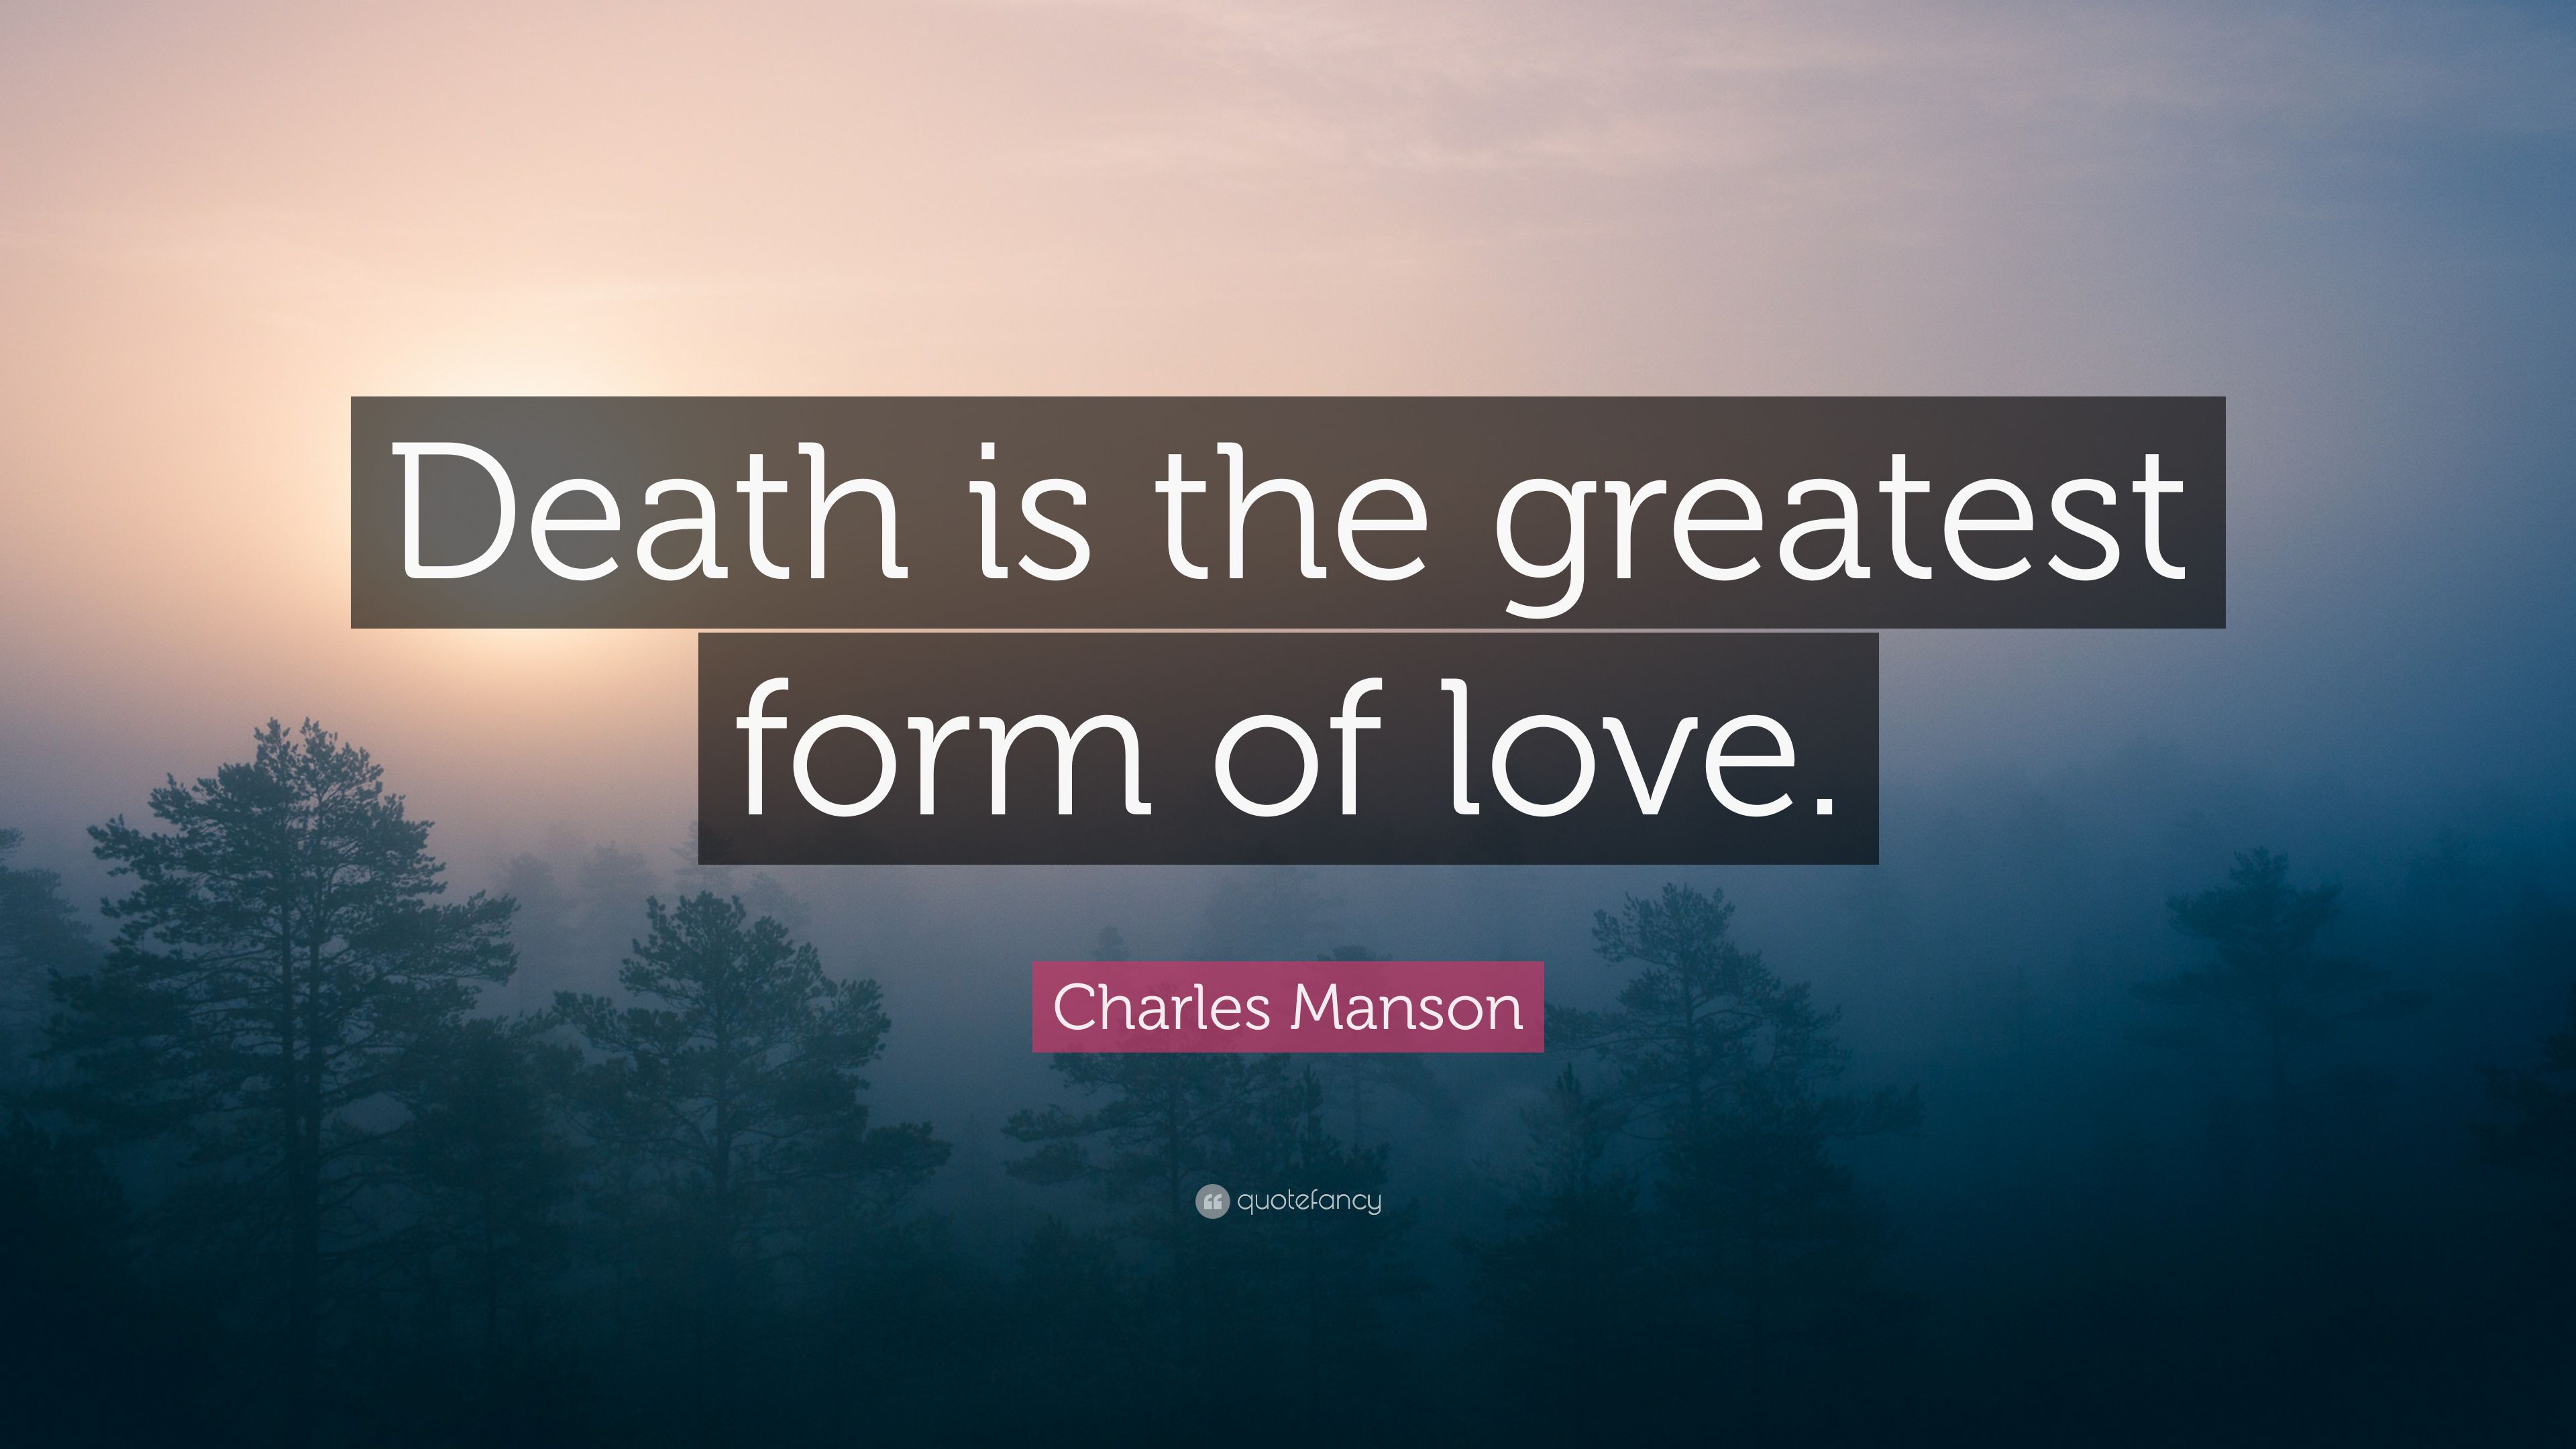 Charles Manson Quote: “Death is the greatest form of love.” 9